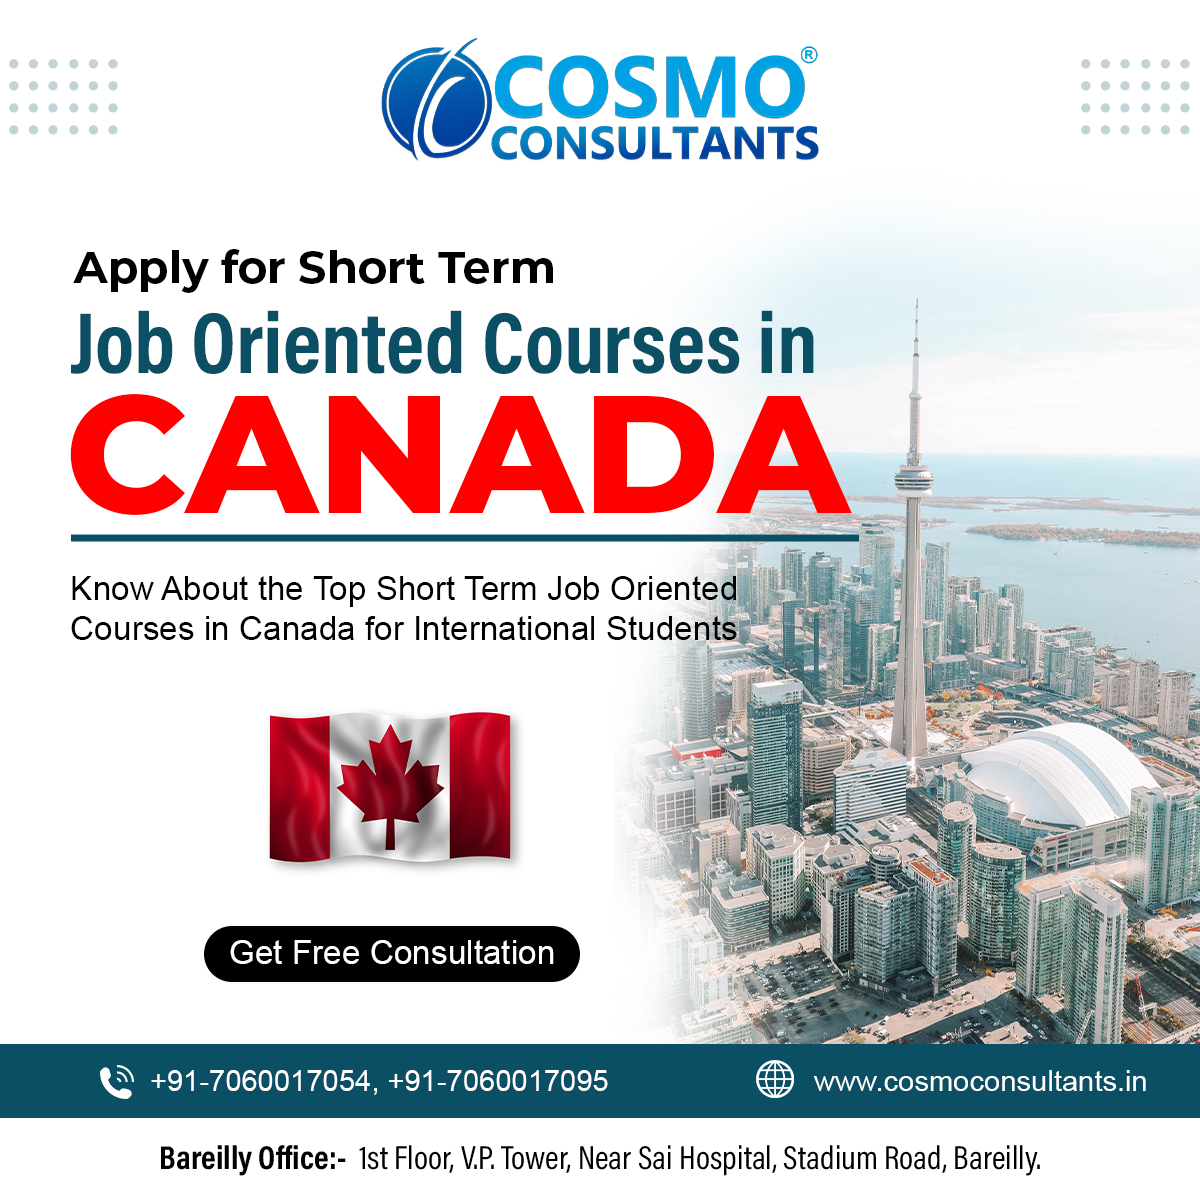 Top Short Term Job Oriented Courses in Canada for International Students bit.ly/440MVfs
Get Free Consultation: +91-7060017054, +91-7060017095.

#CosmoConsultants #Canada #JobOrientedCoursesInCanada #JobOrientedCourses #ShortTermCourses #StudyInCanada #StudyAbroad